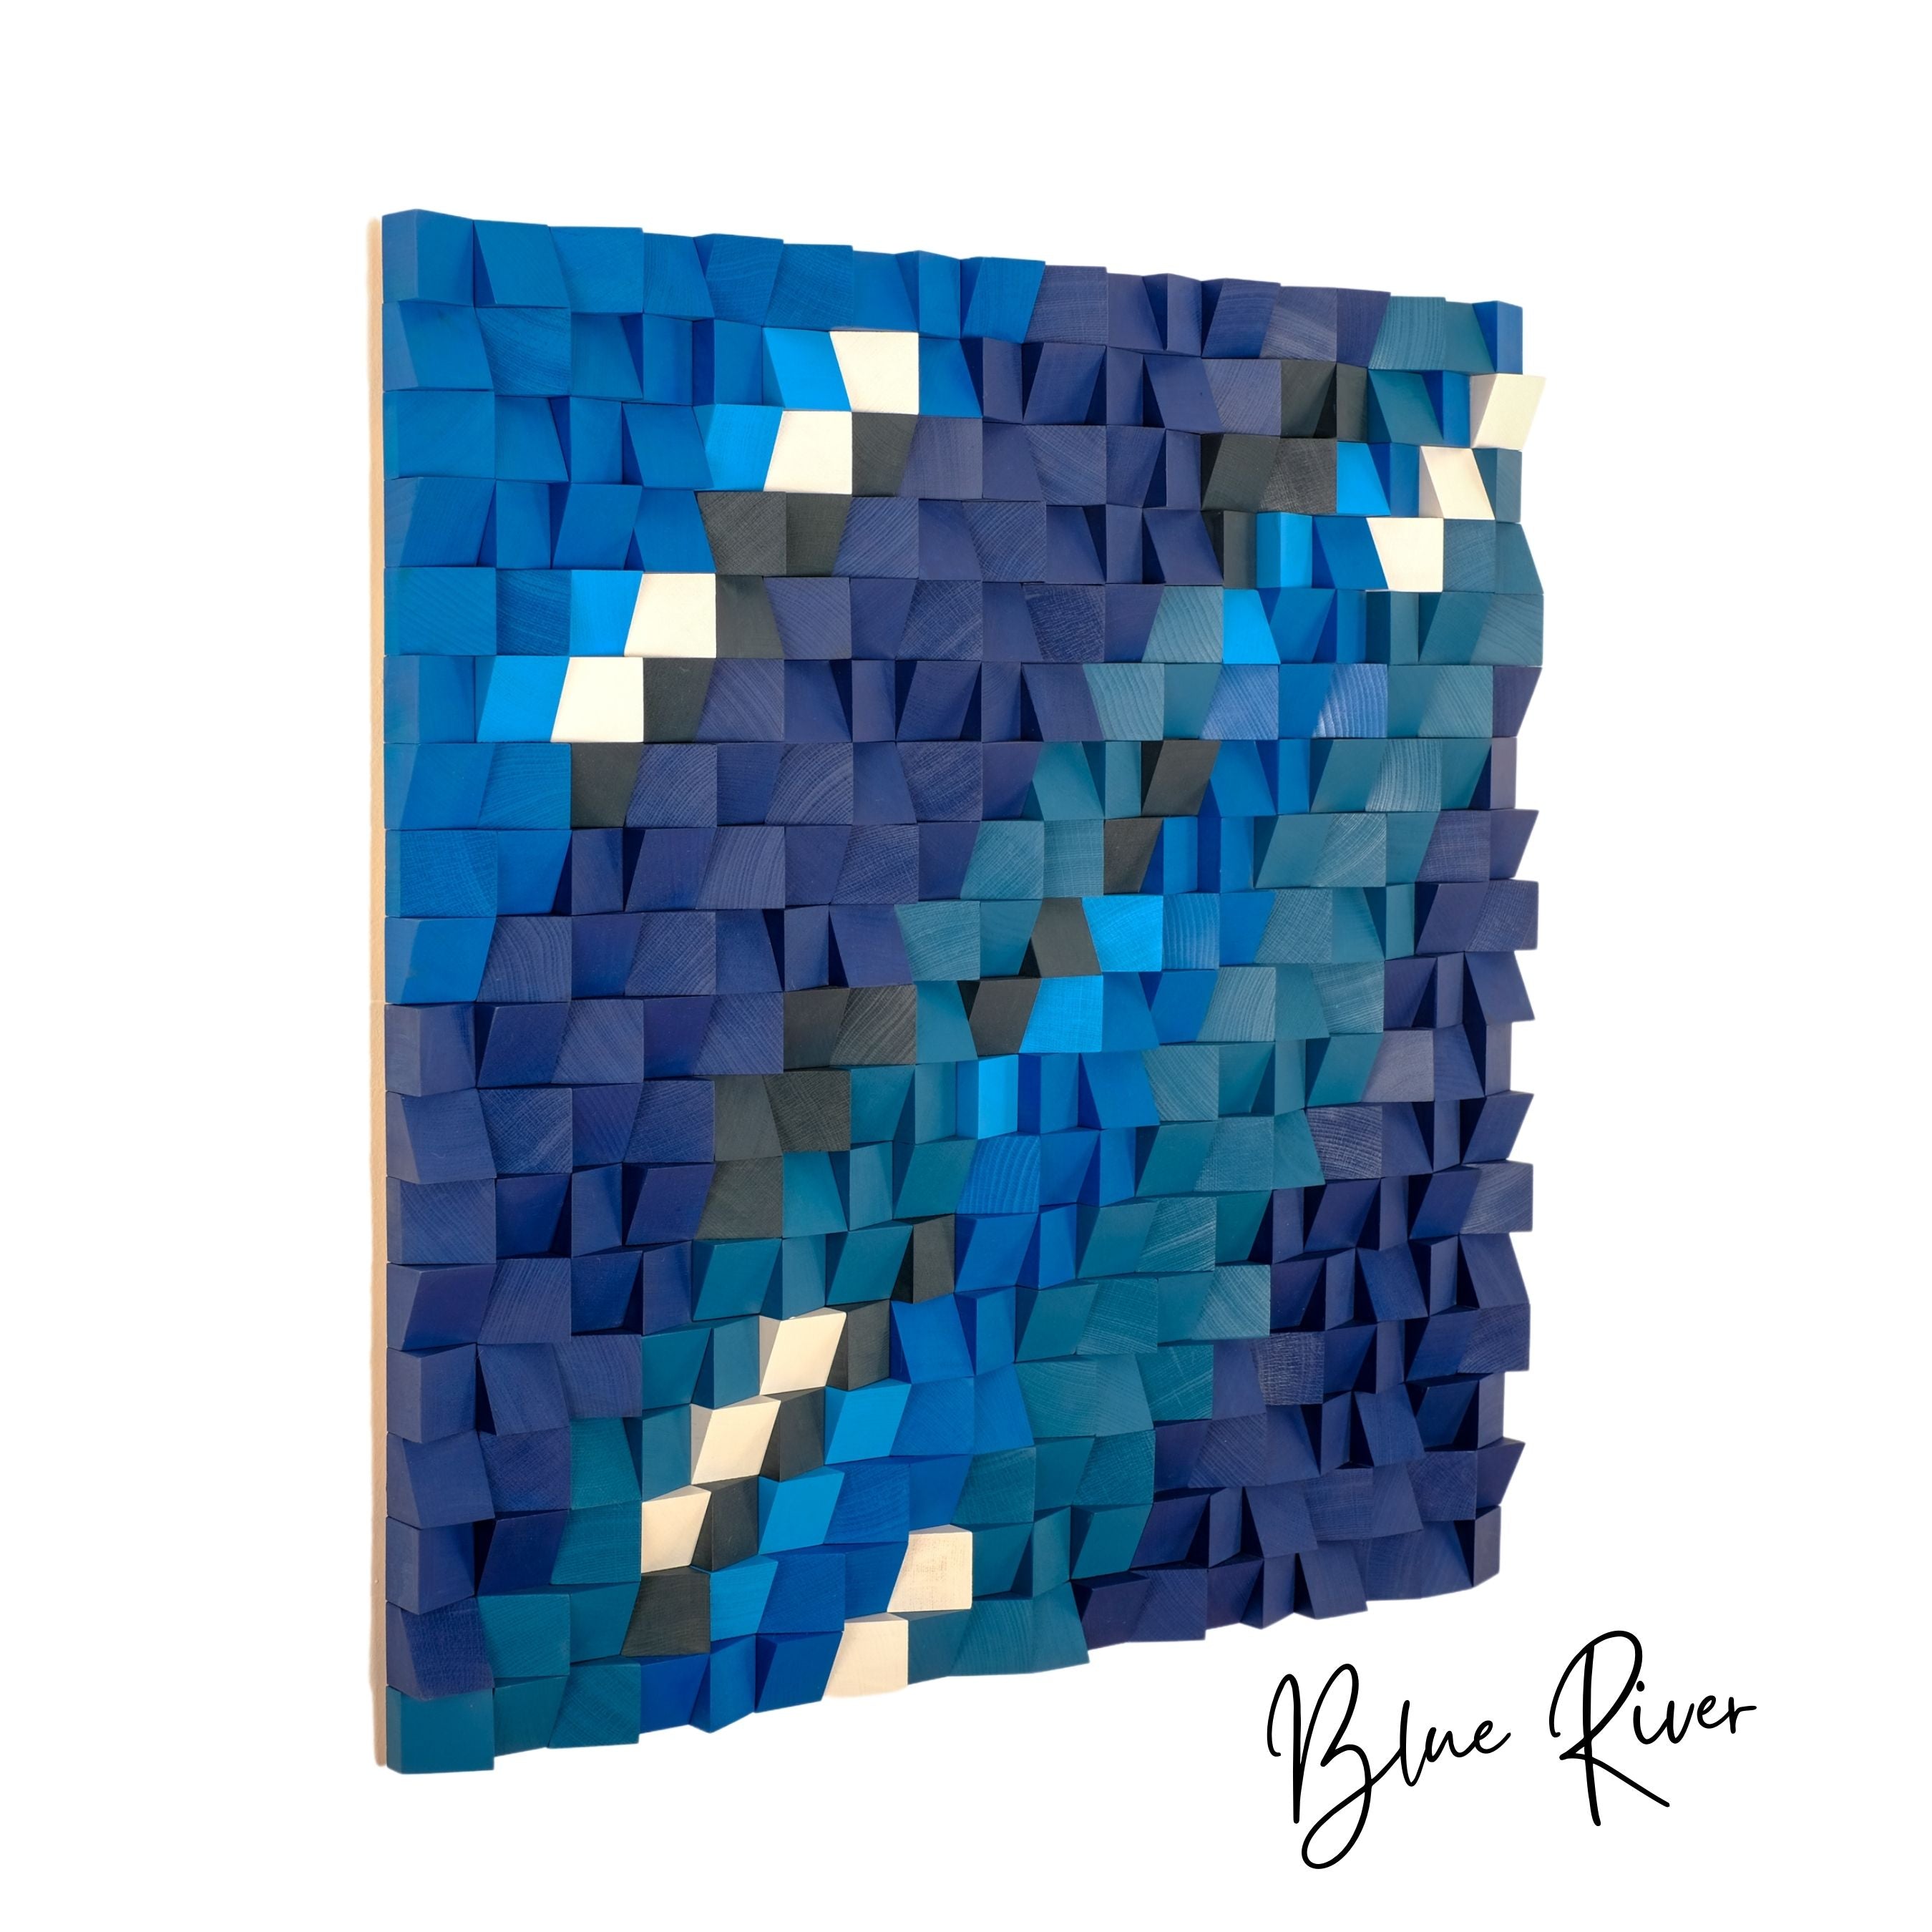 ・"Blue River"・Premium Wood Handmade Wall Sculpture - Limited Edition